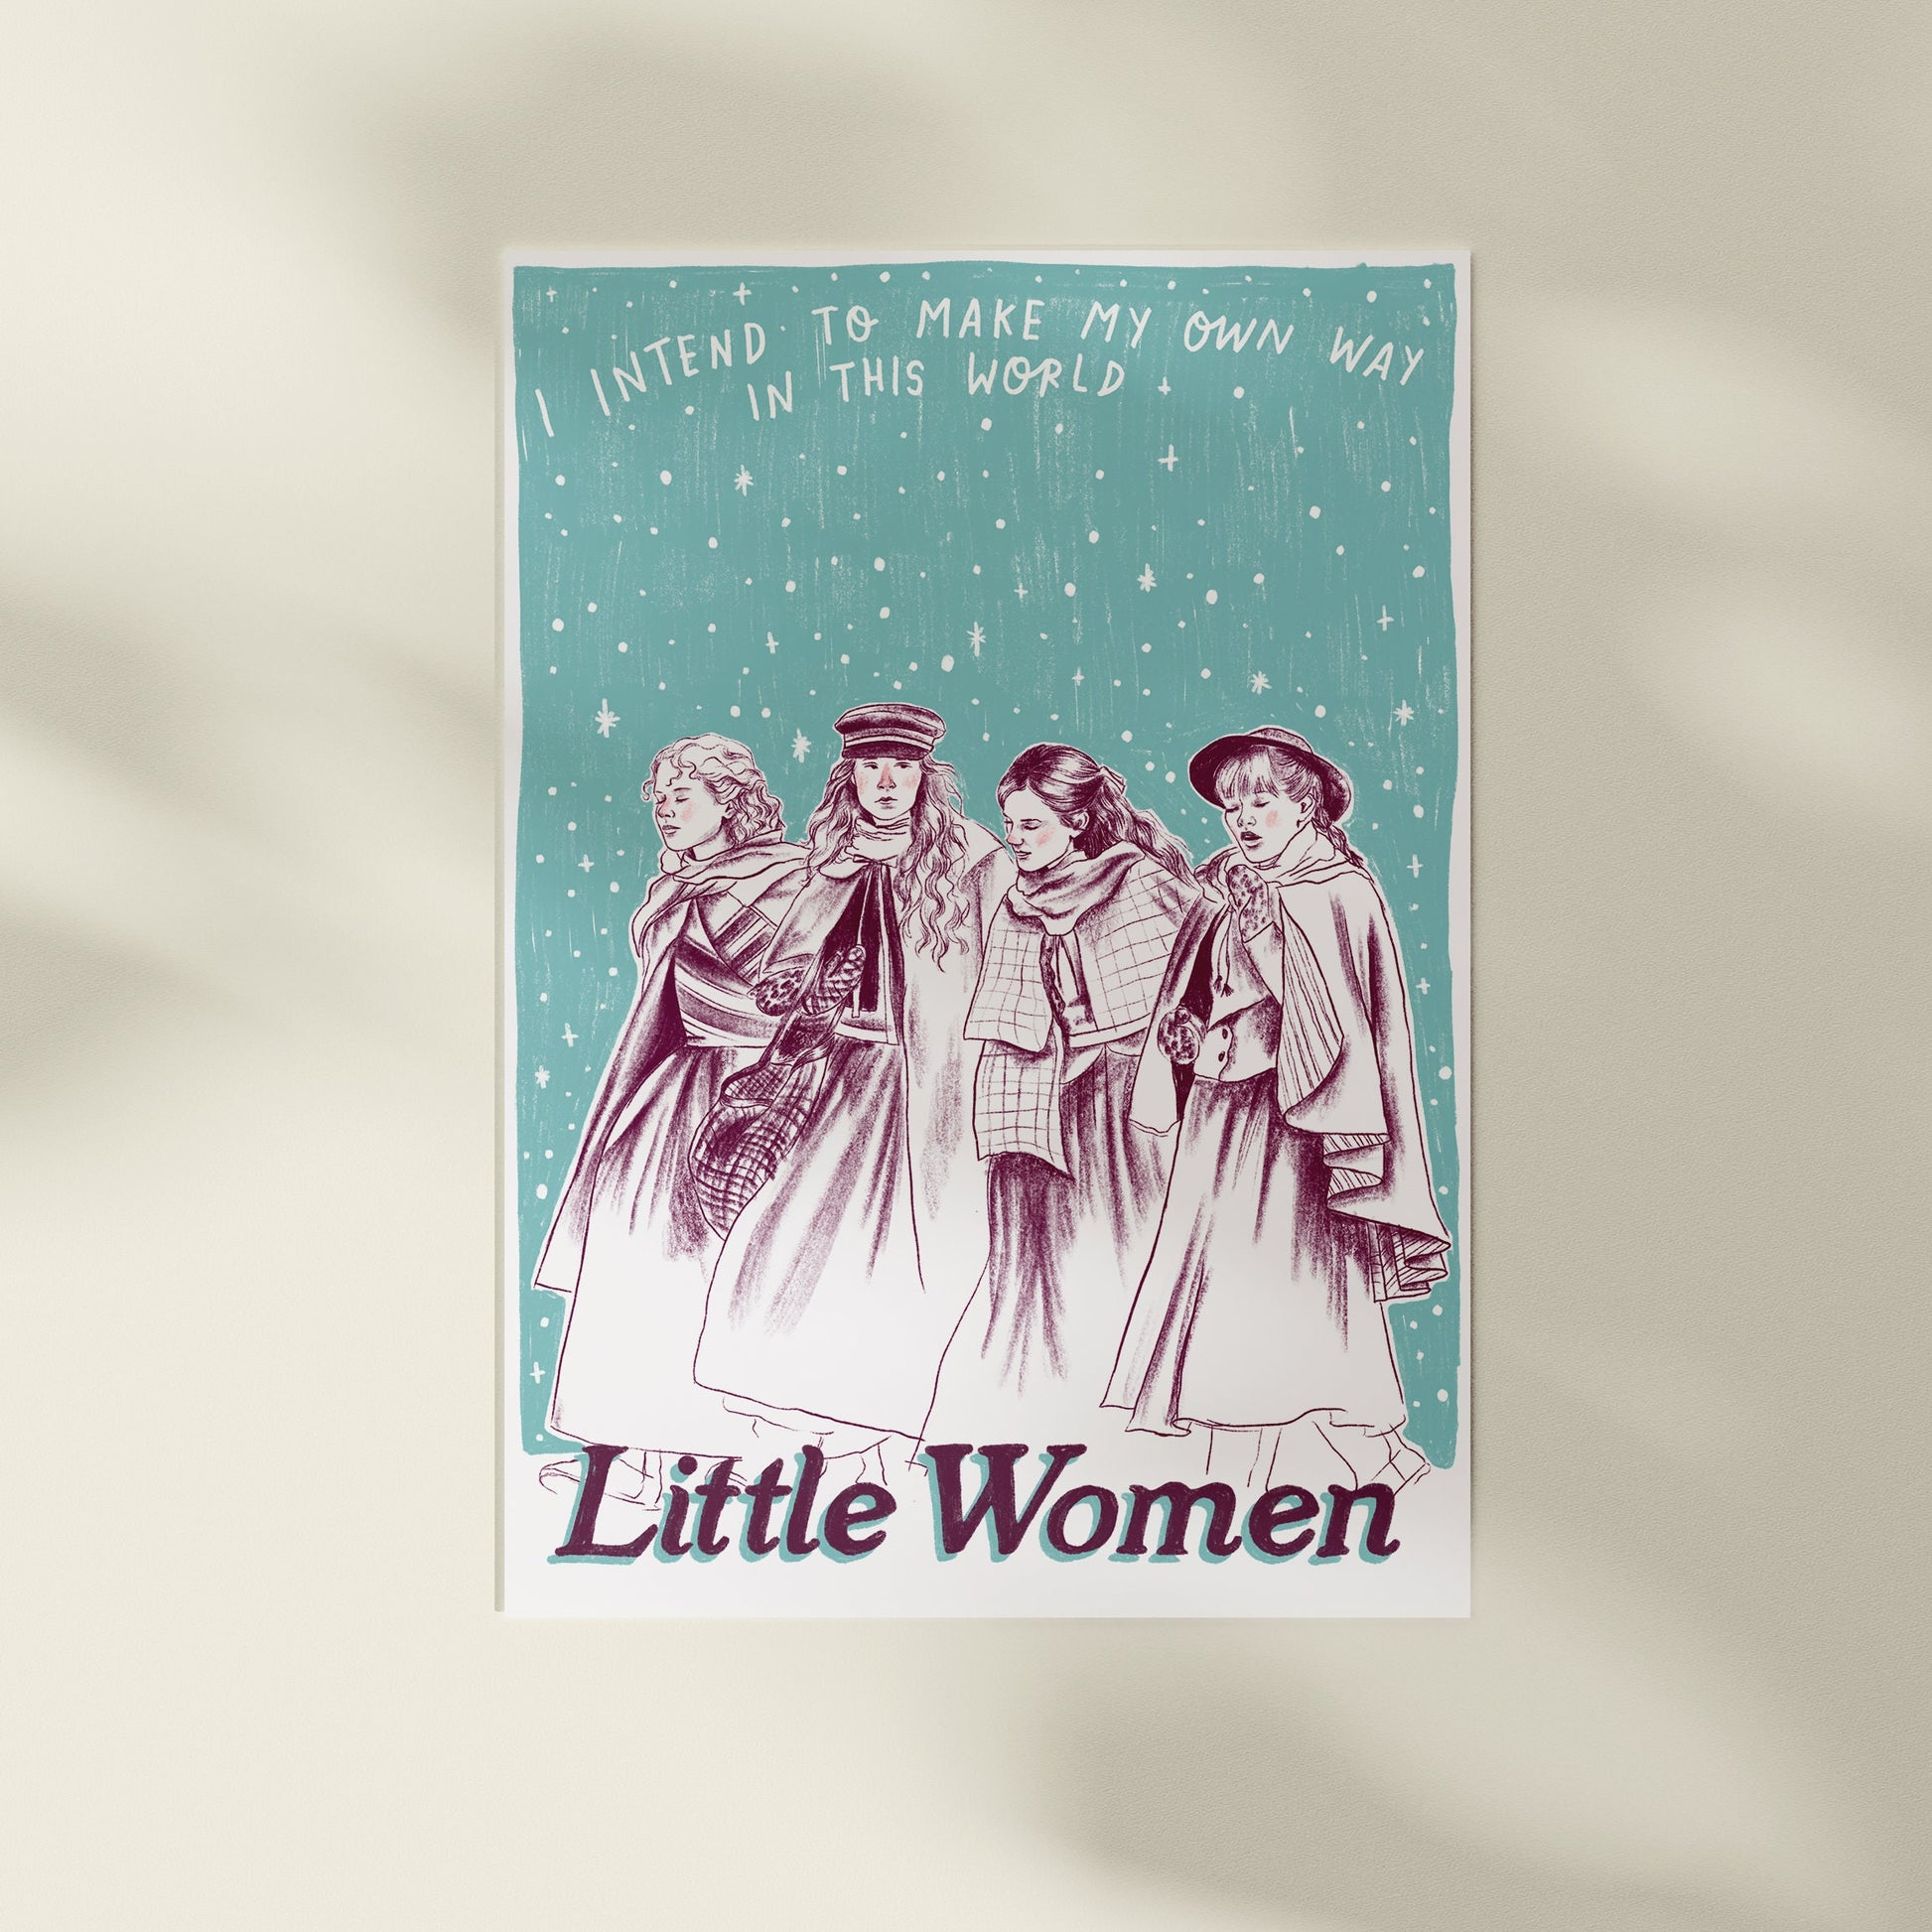 Little Women - I intend to make my own way in this world A4 Art Print